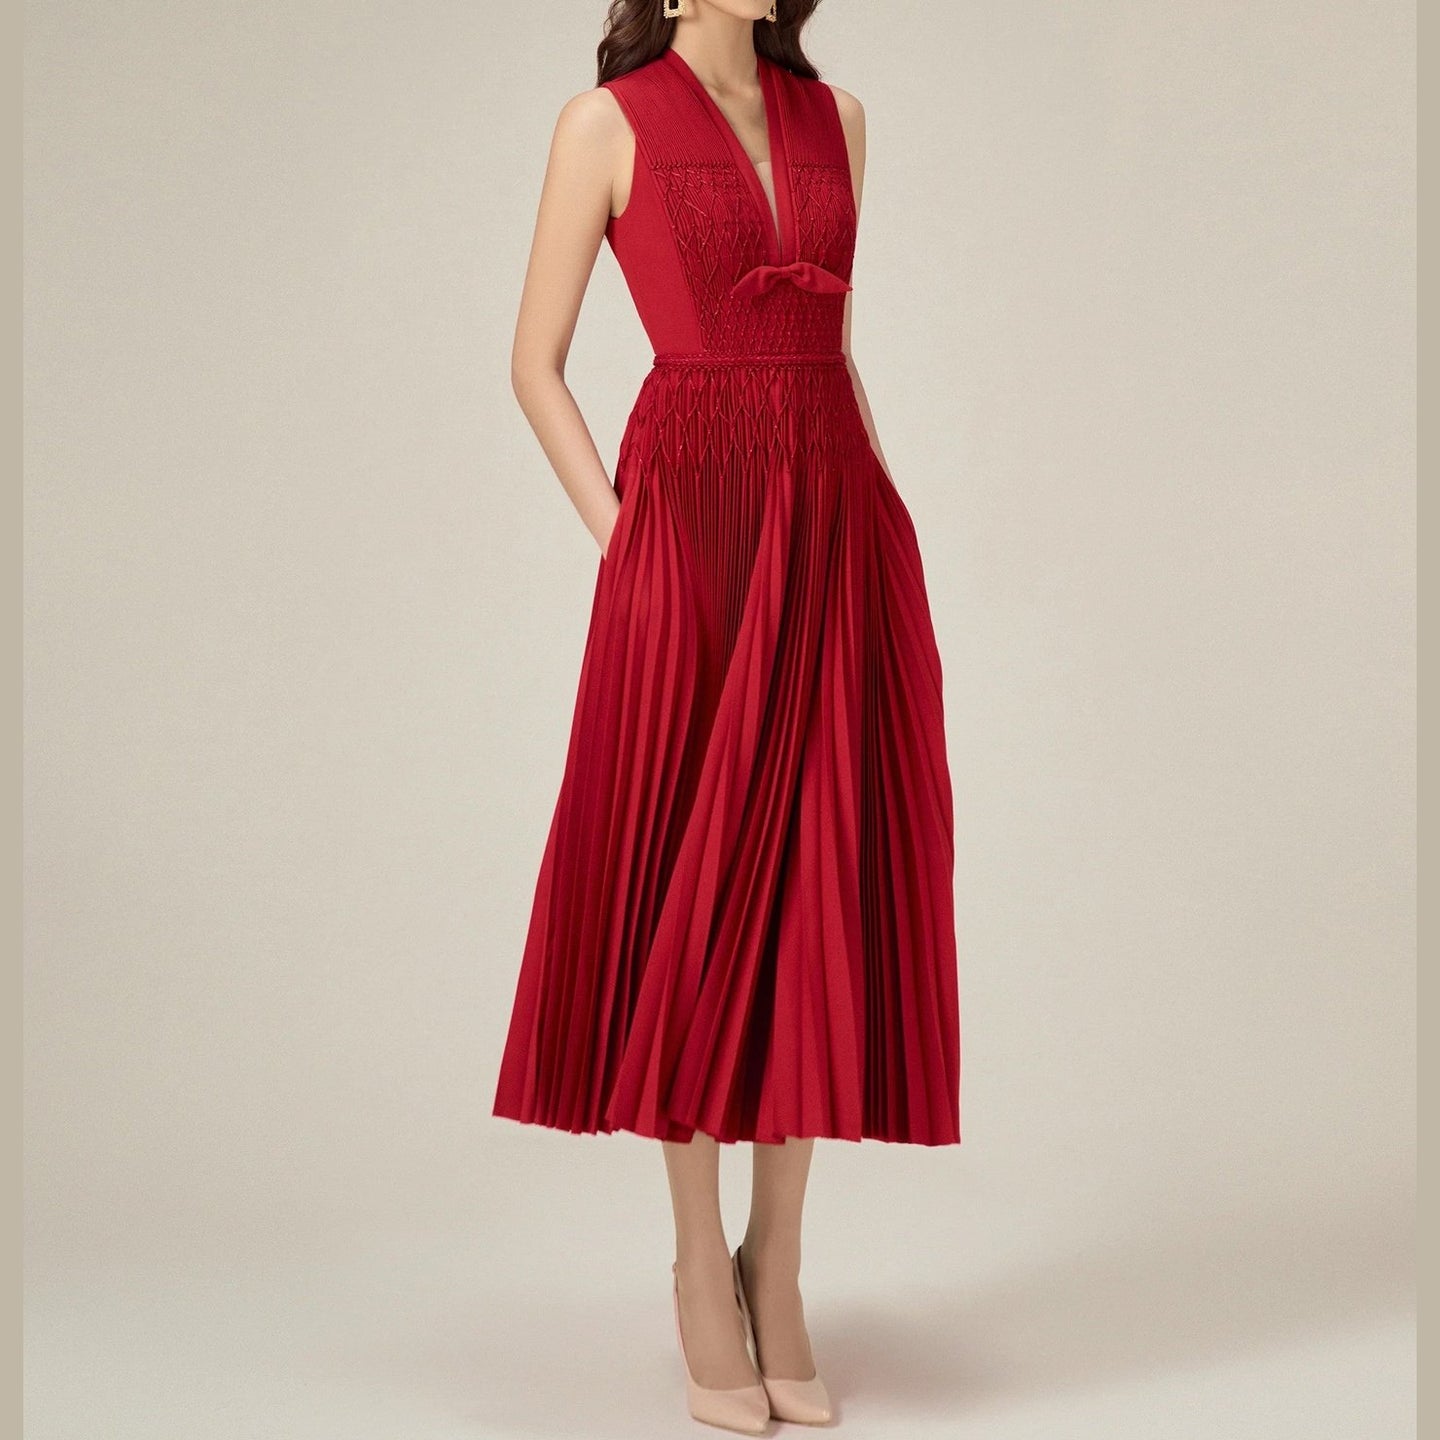 CHERIE | Red Midi Pleated Dress Summer Office dress red - Cielie